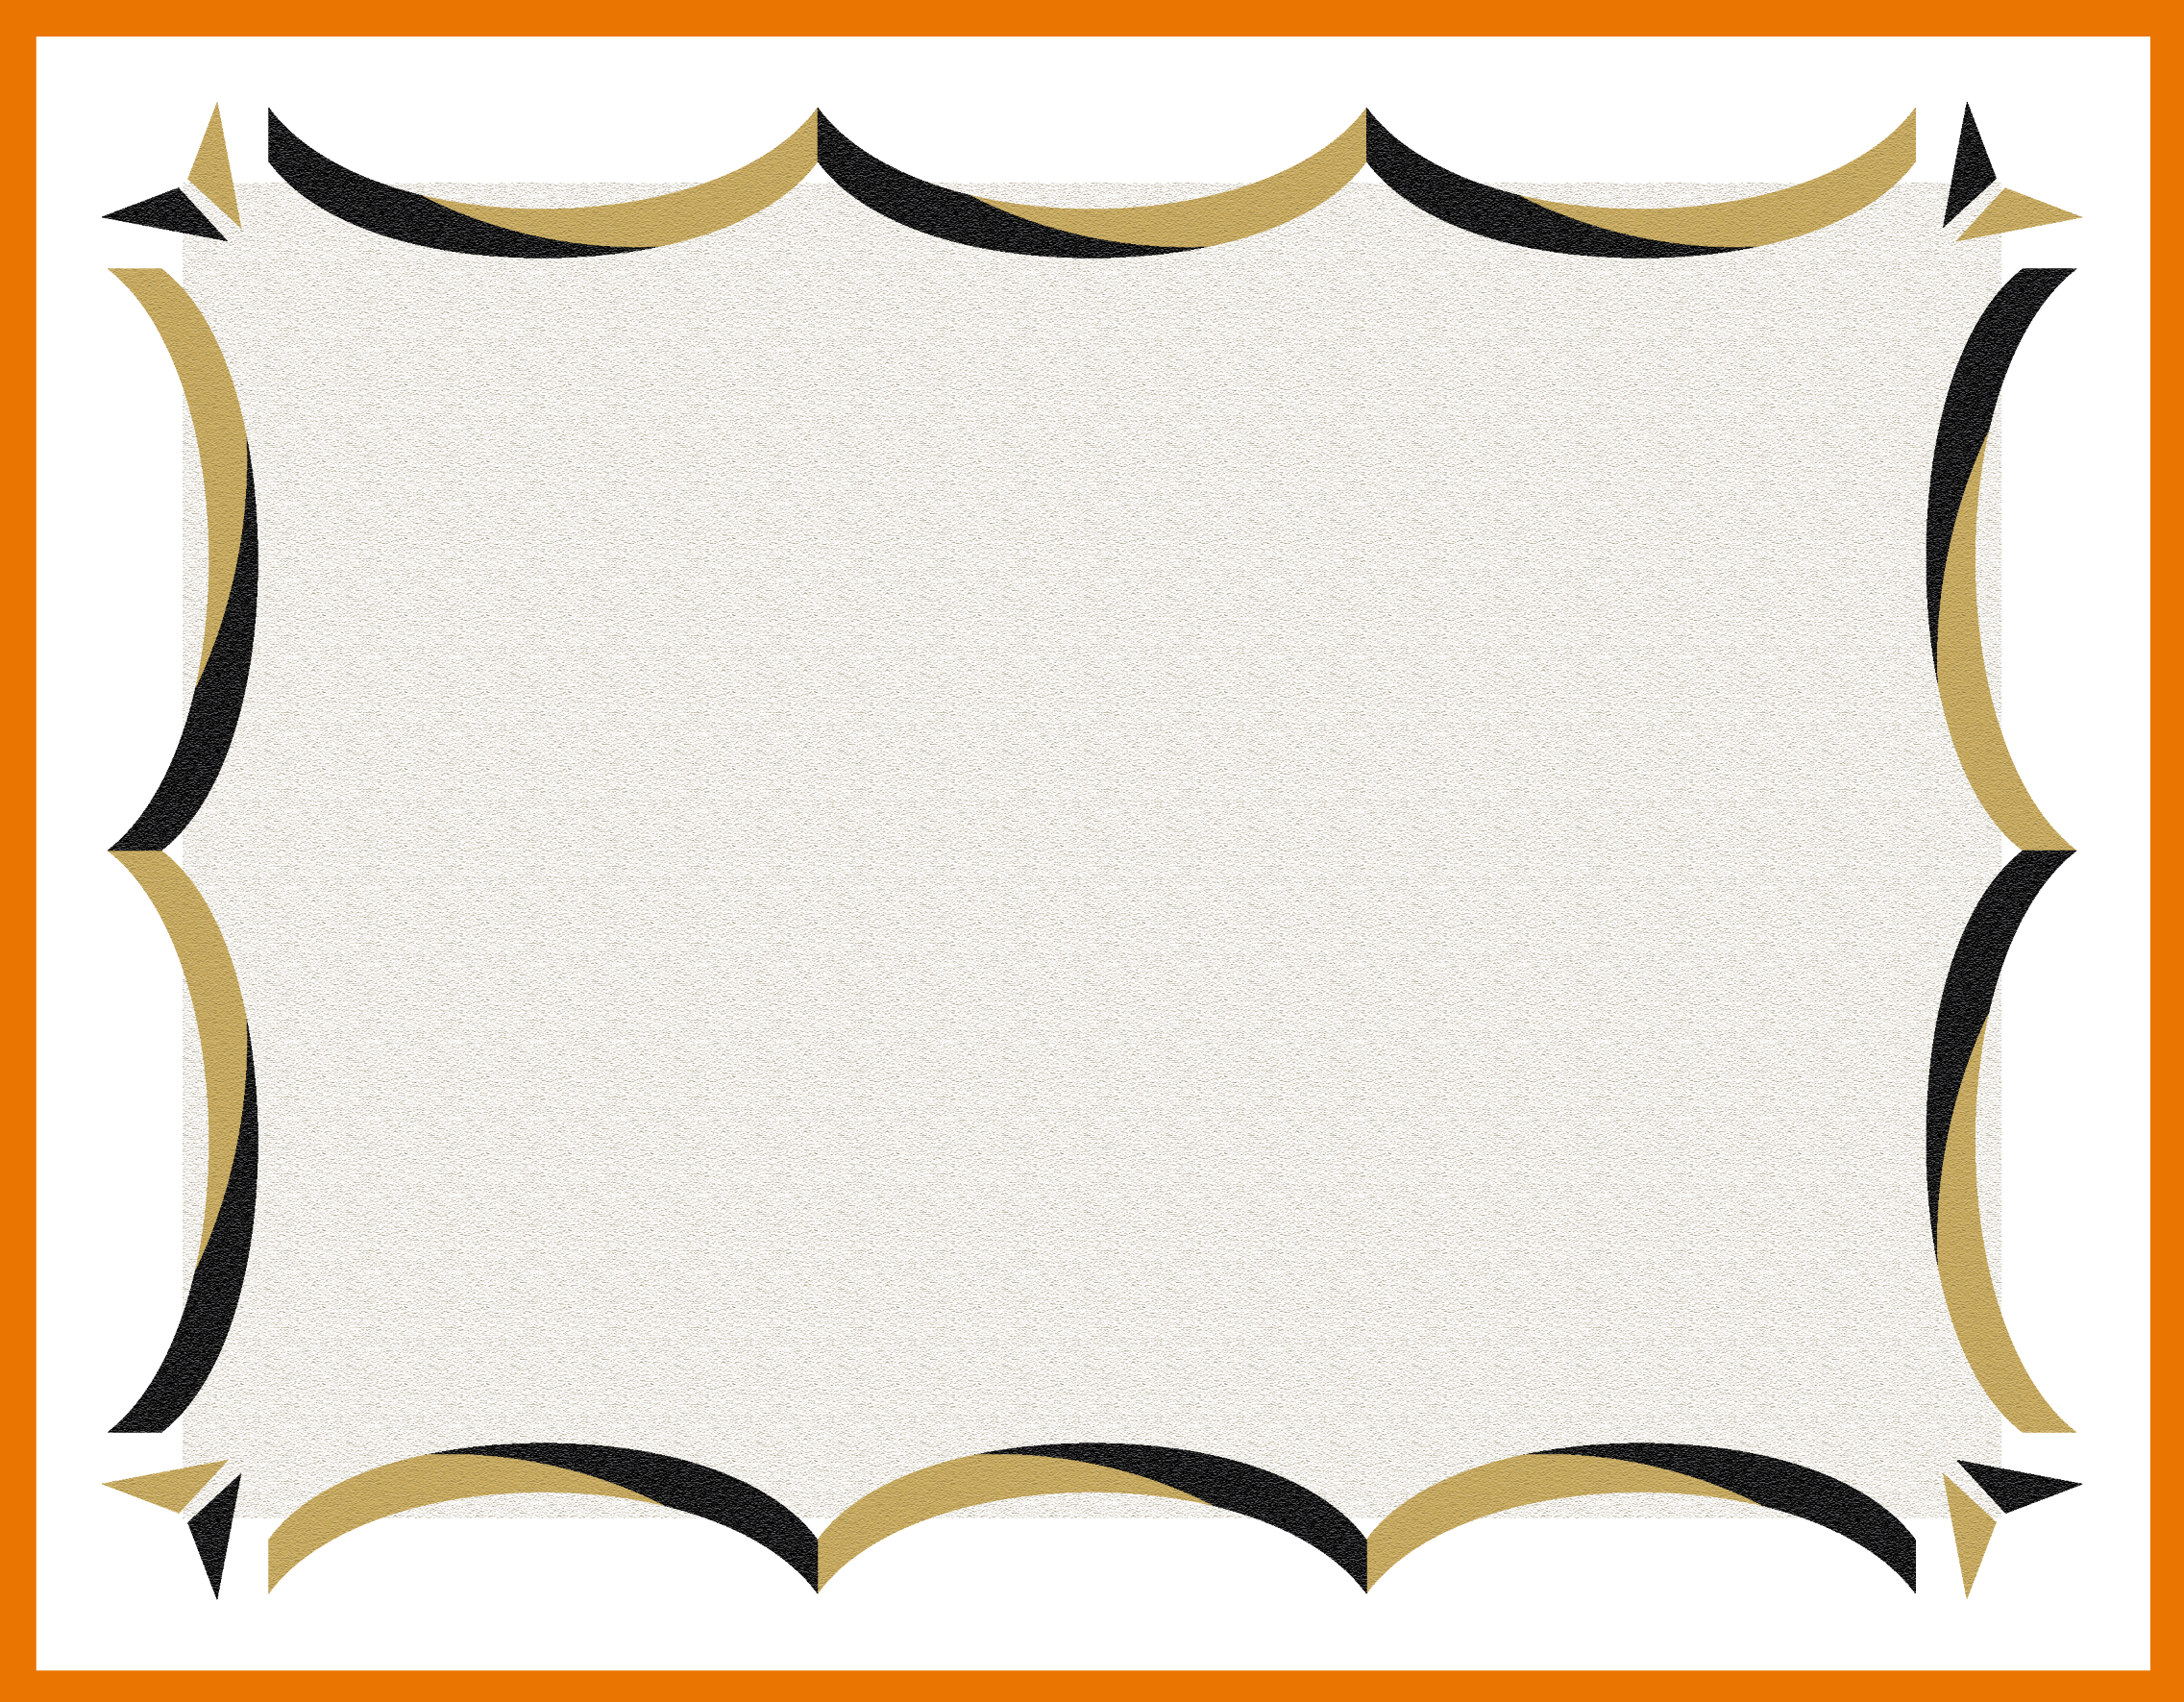 Printable Certificate Templates.Certificate Border 3 Black And ...